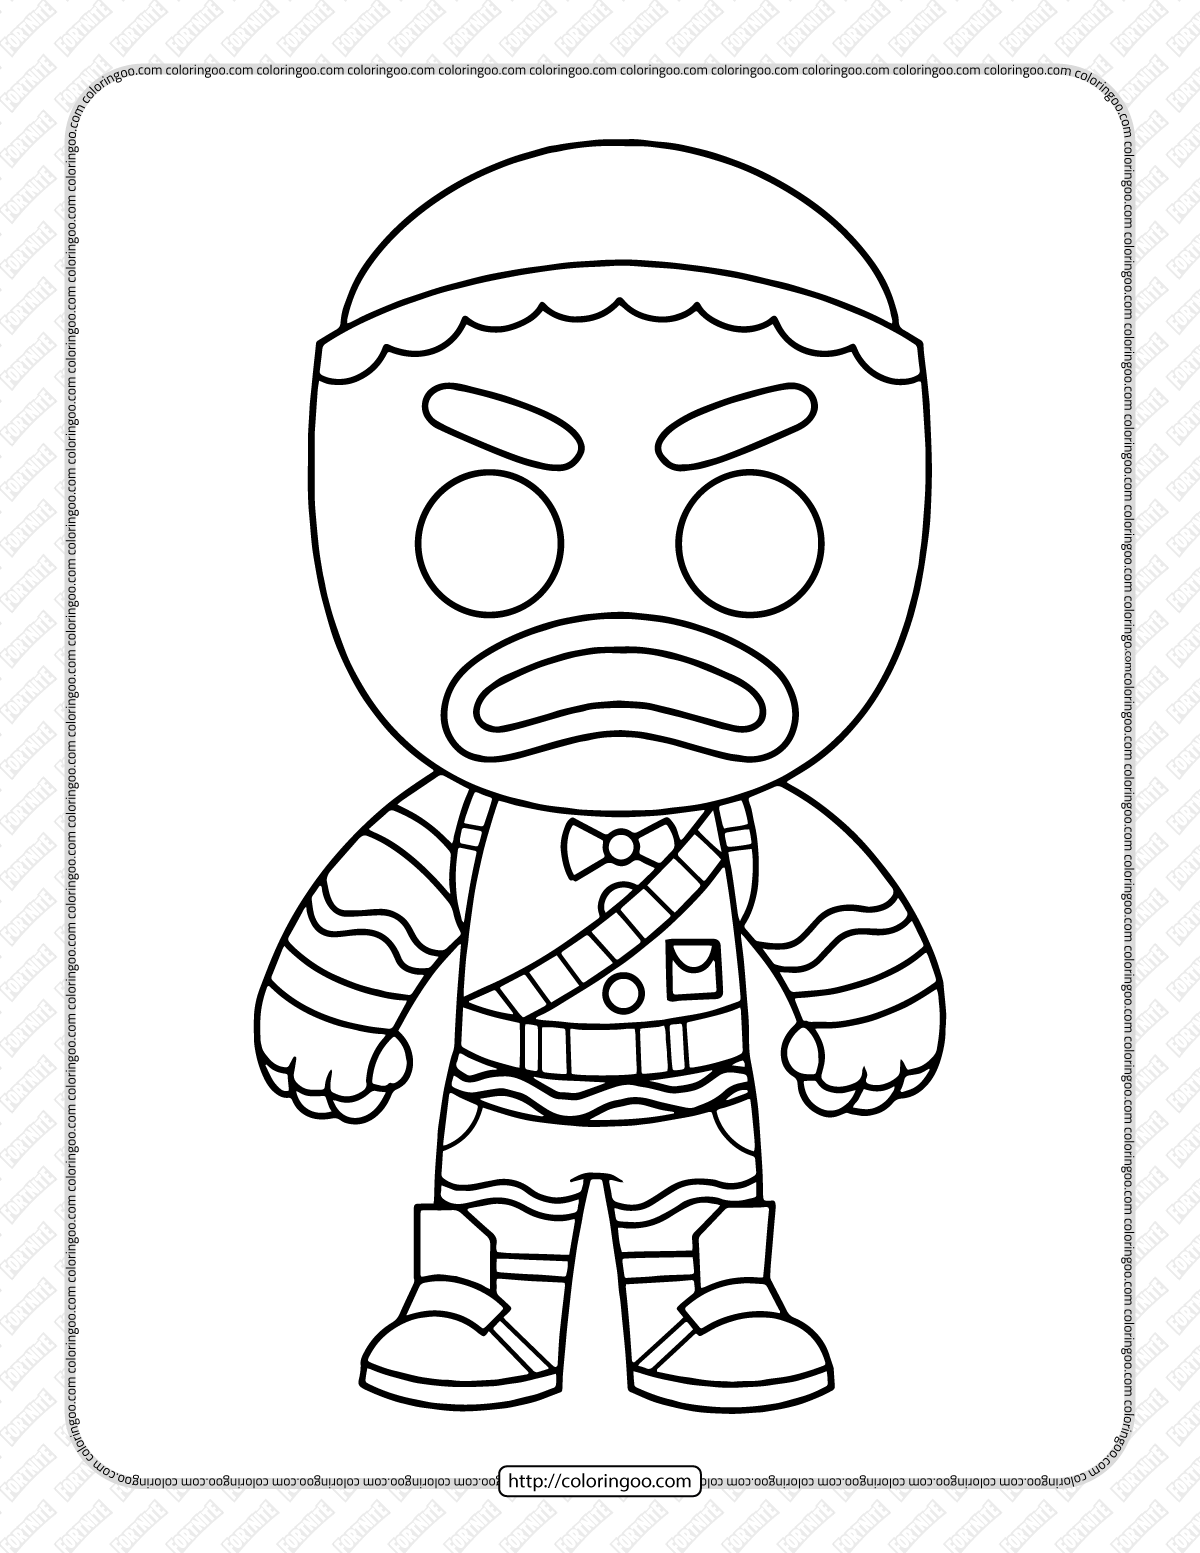 chibi fortnite coloring pages 04